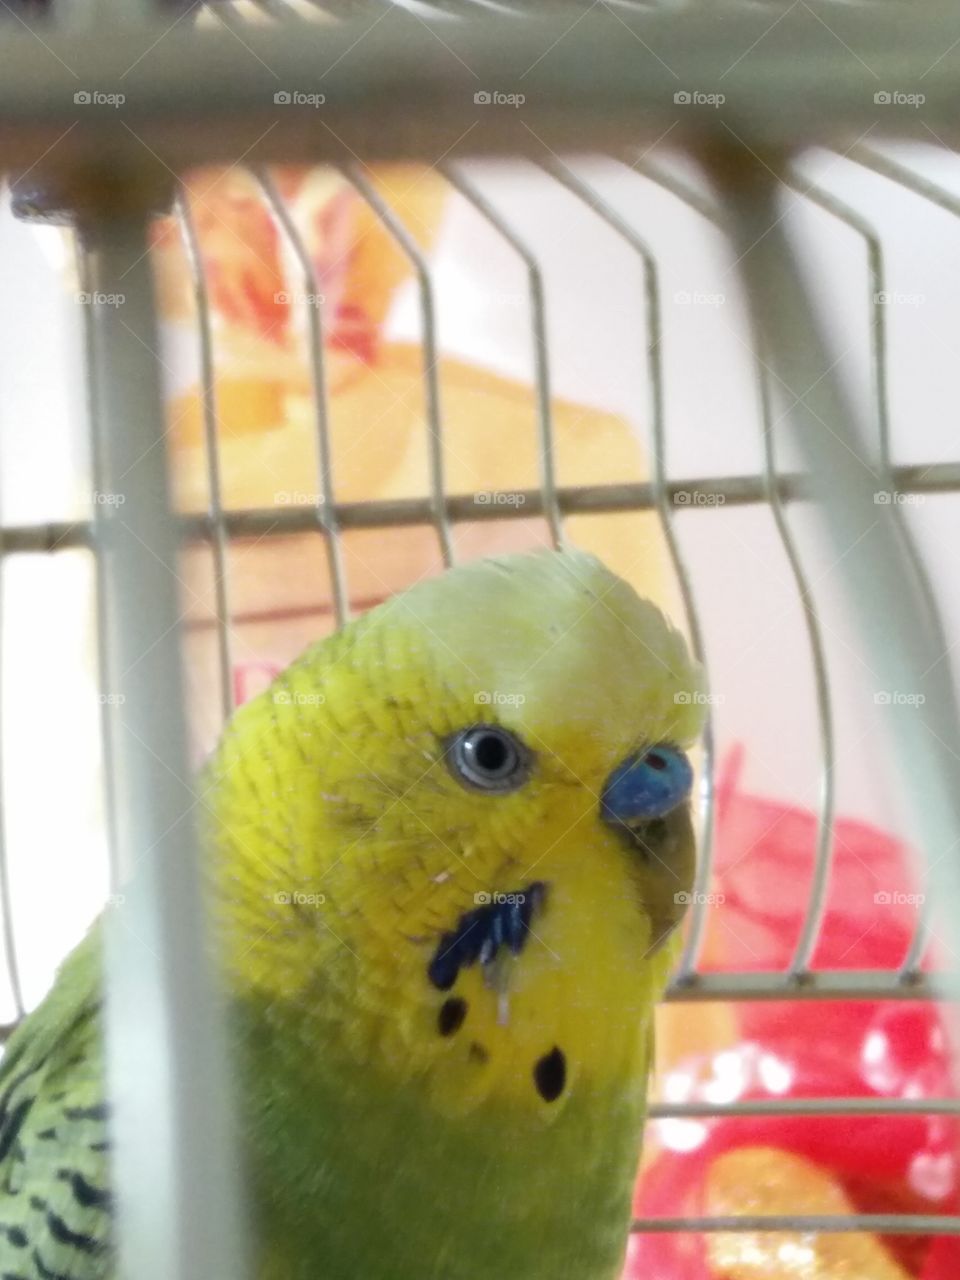 A little parrot Looking curious from the cage